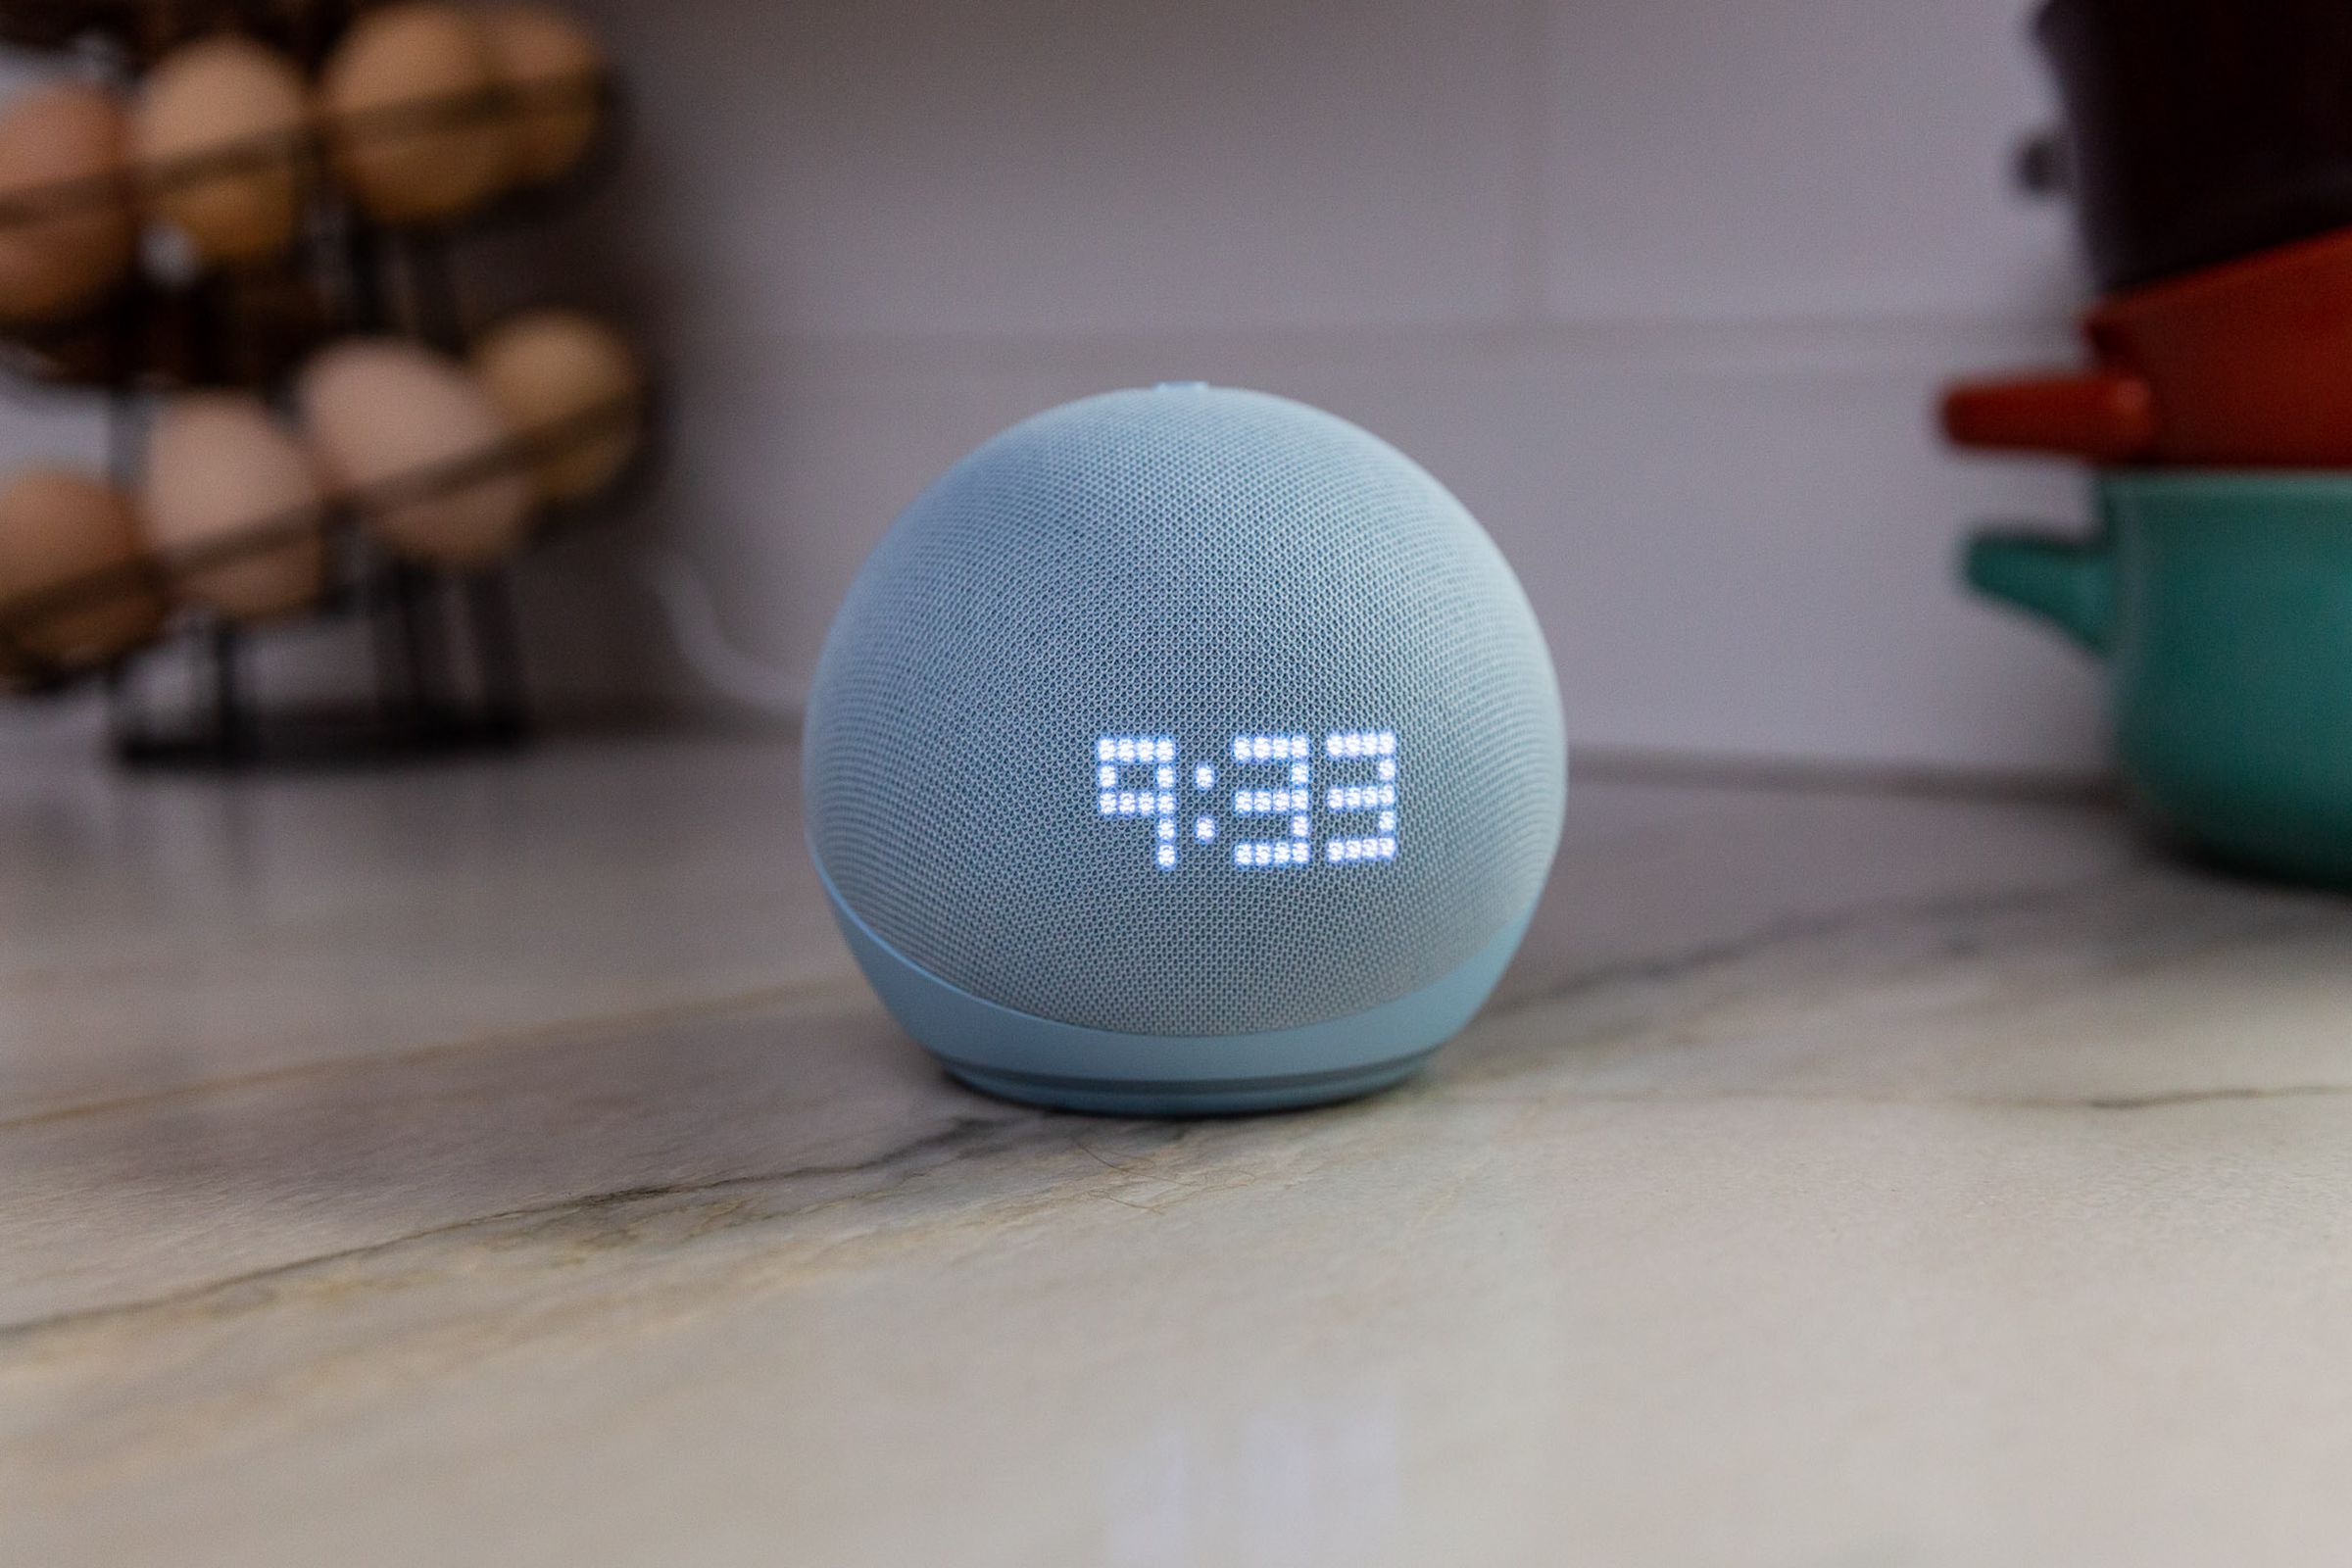 Amazon’s latest smart speaker, the fifth-gen Echo Dot with Clock, sitting on a table showing the time.